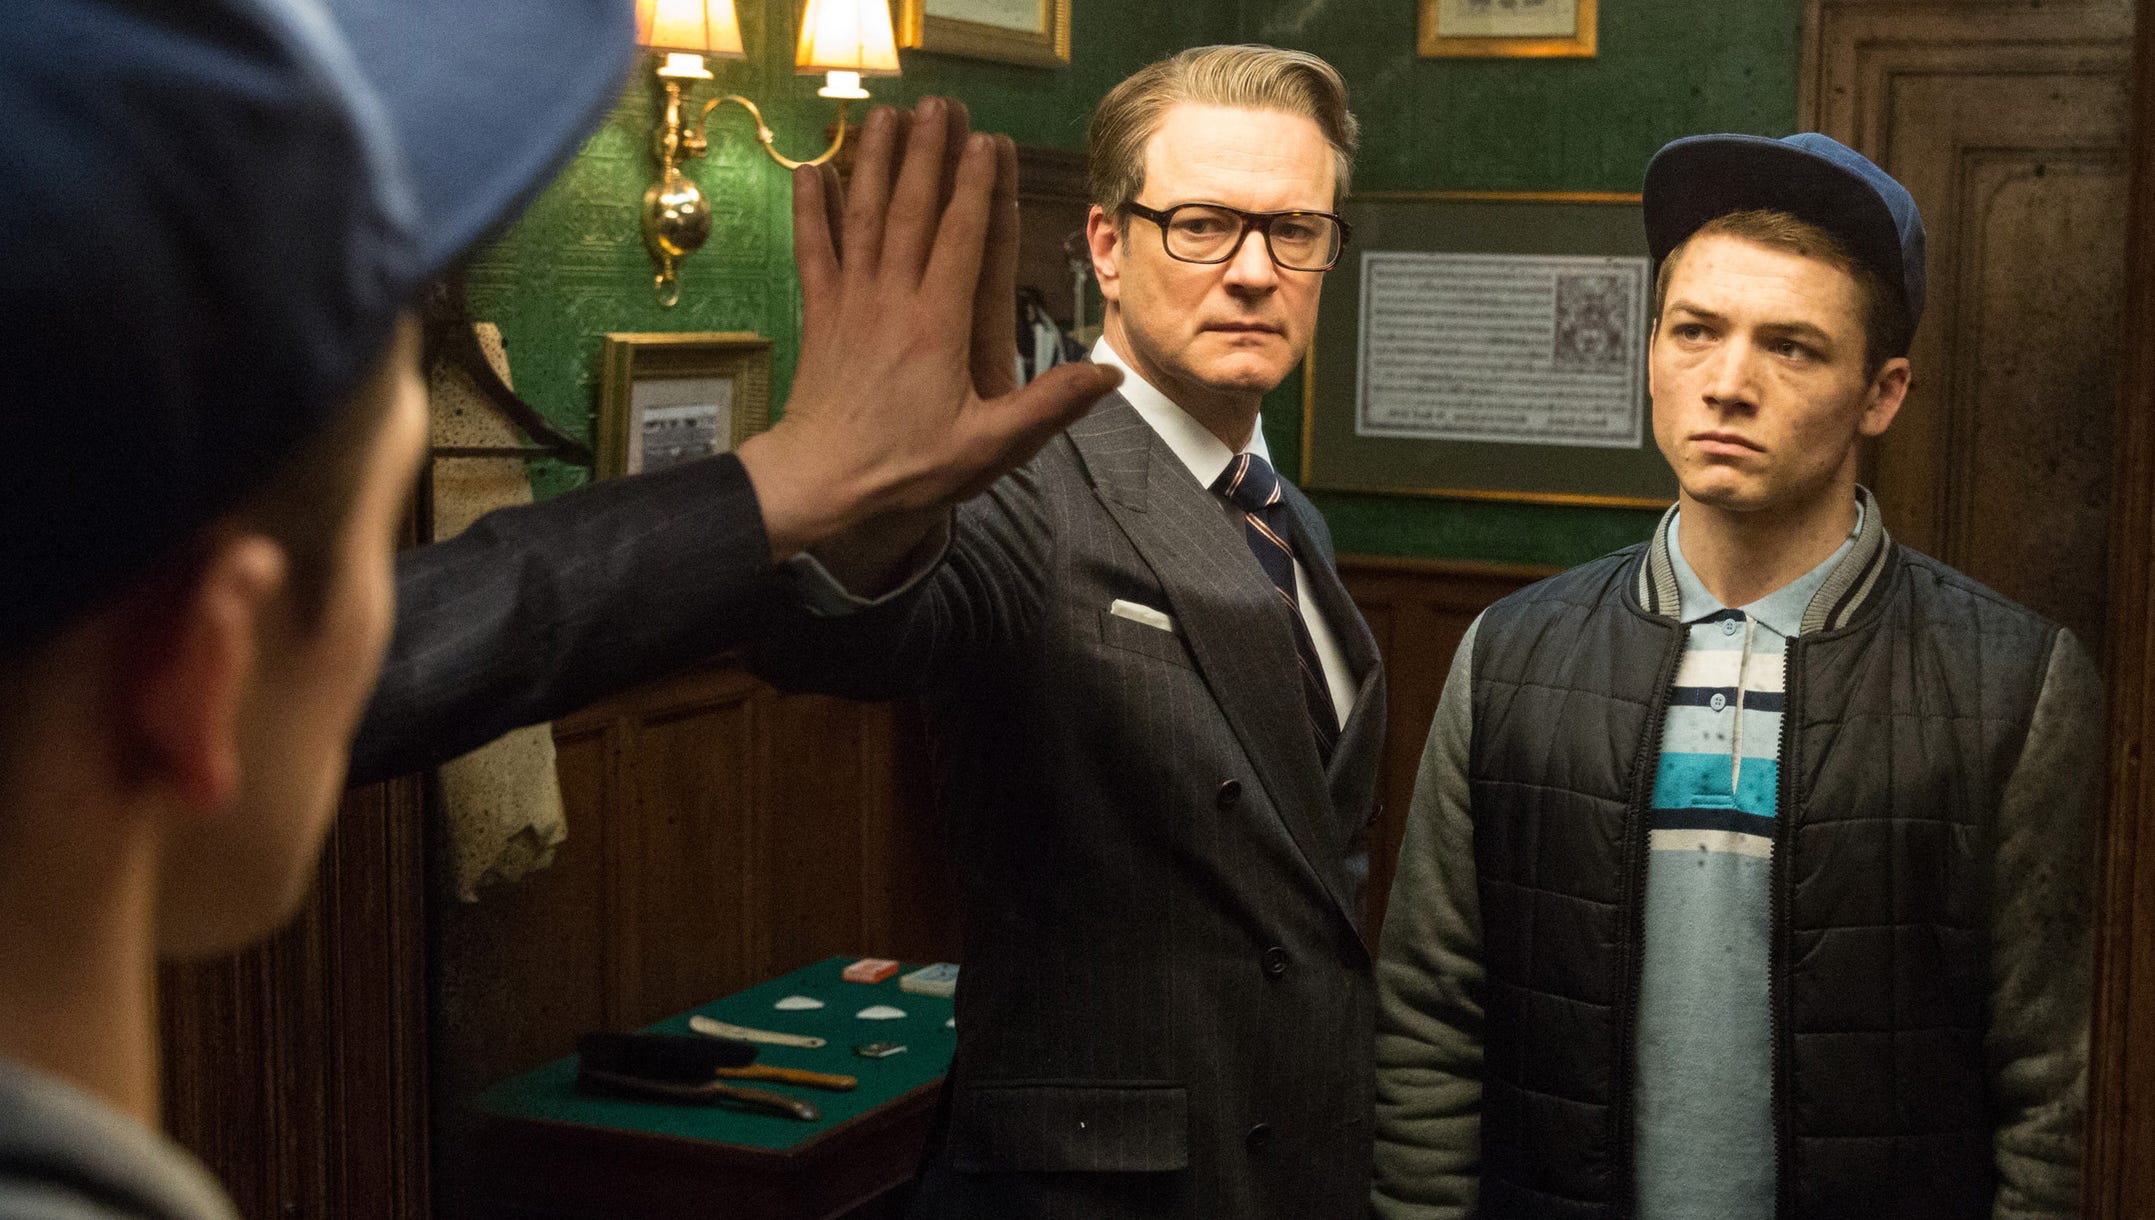 Harry (Colin Firth) helps Eggsy (Taron Egerton) in the spy business in